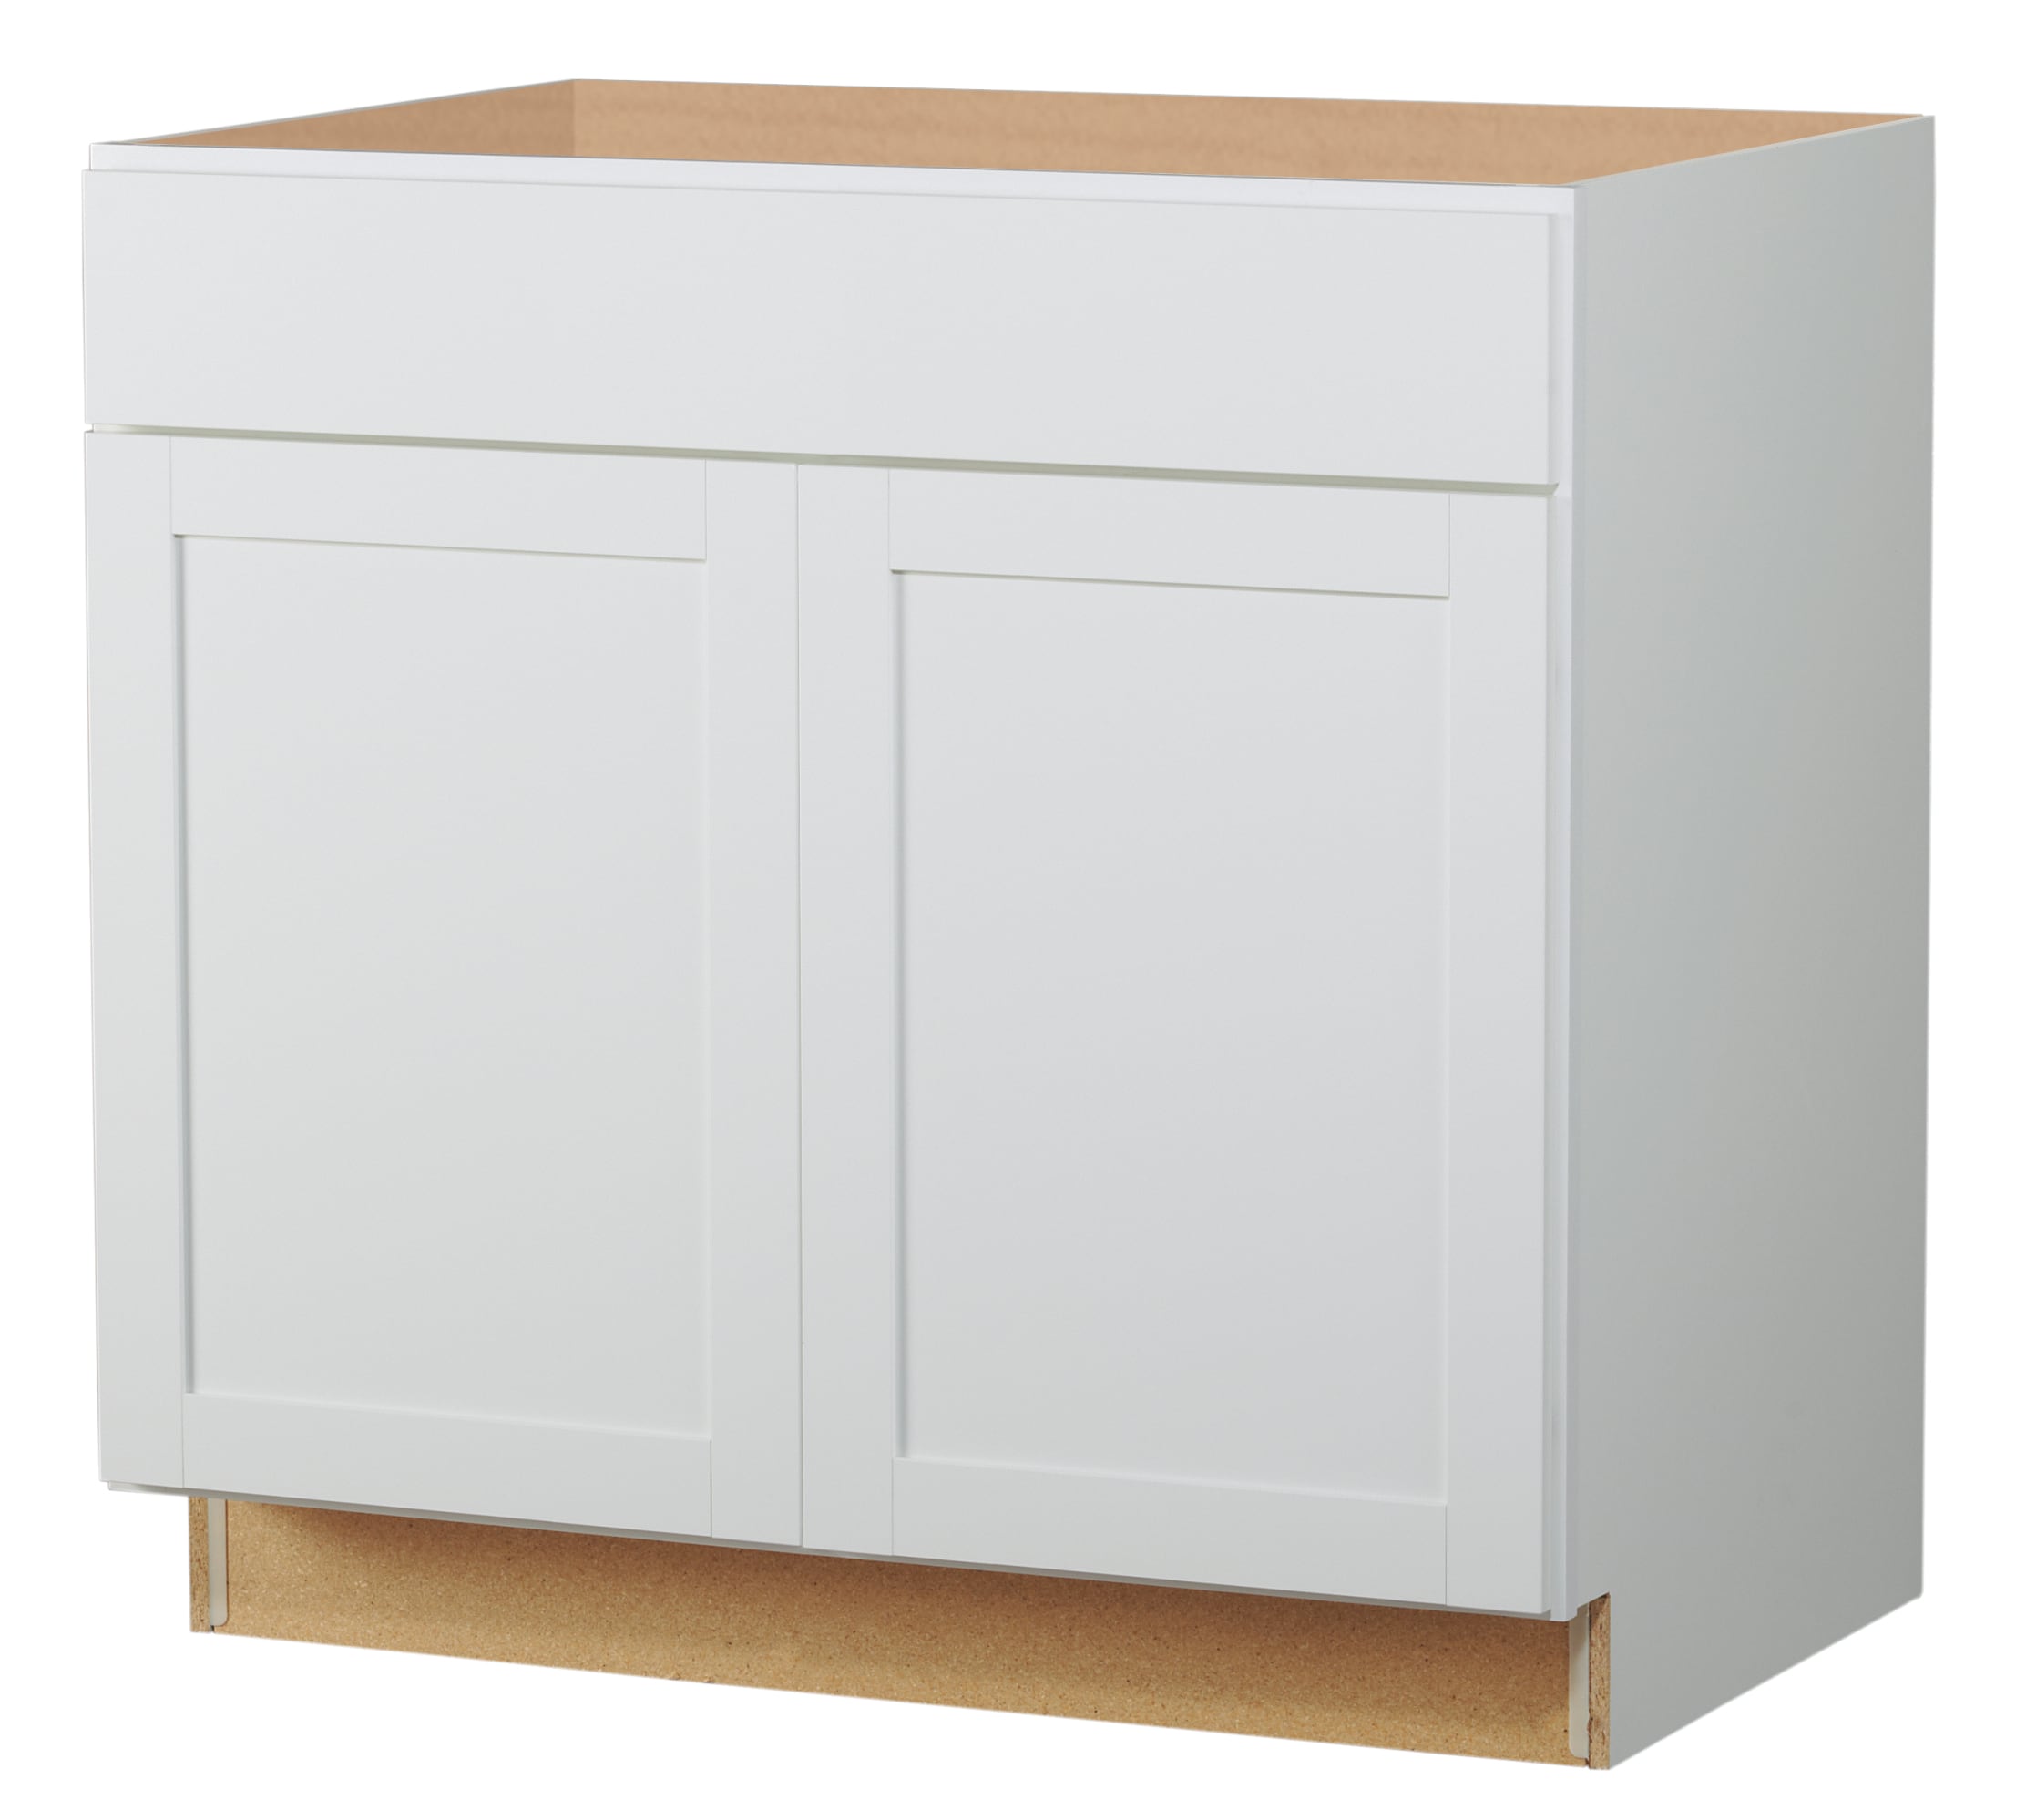 Under Counter Storage Cabinet - 36 x 18 x 36, Assembled, Gray H